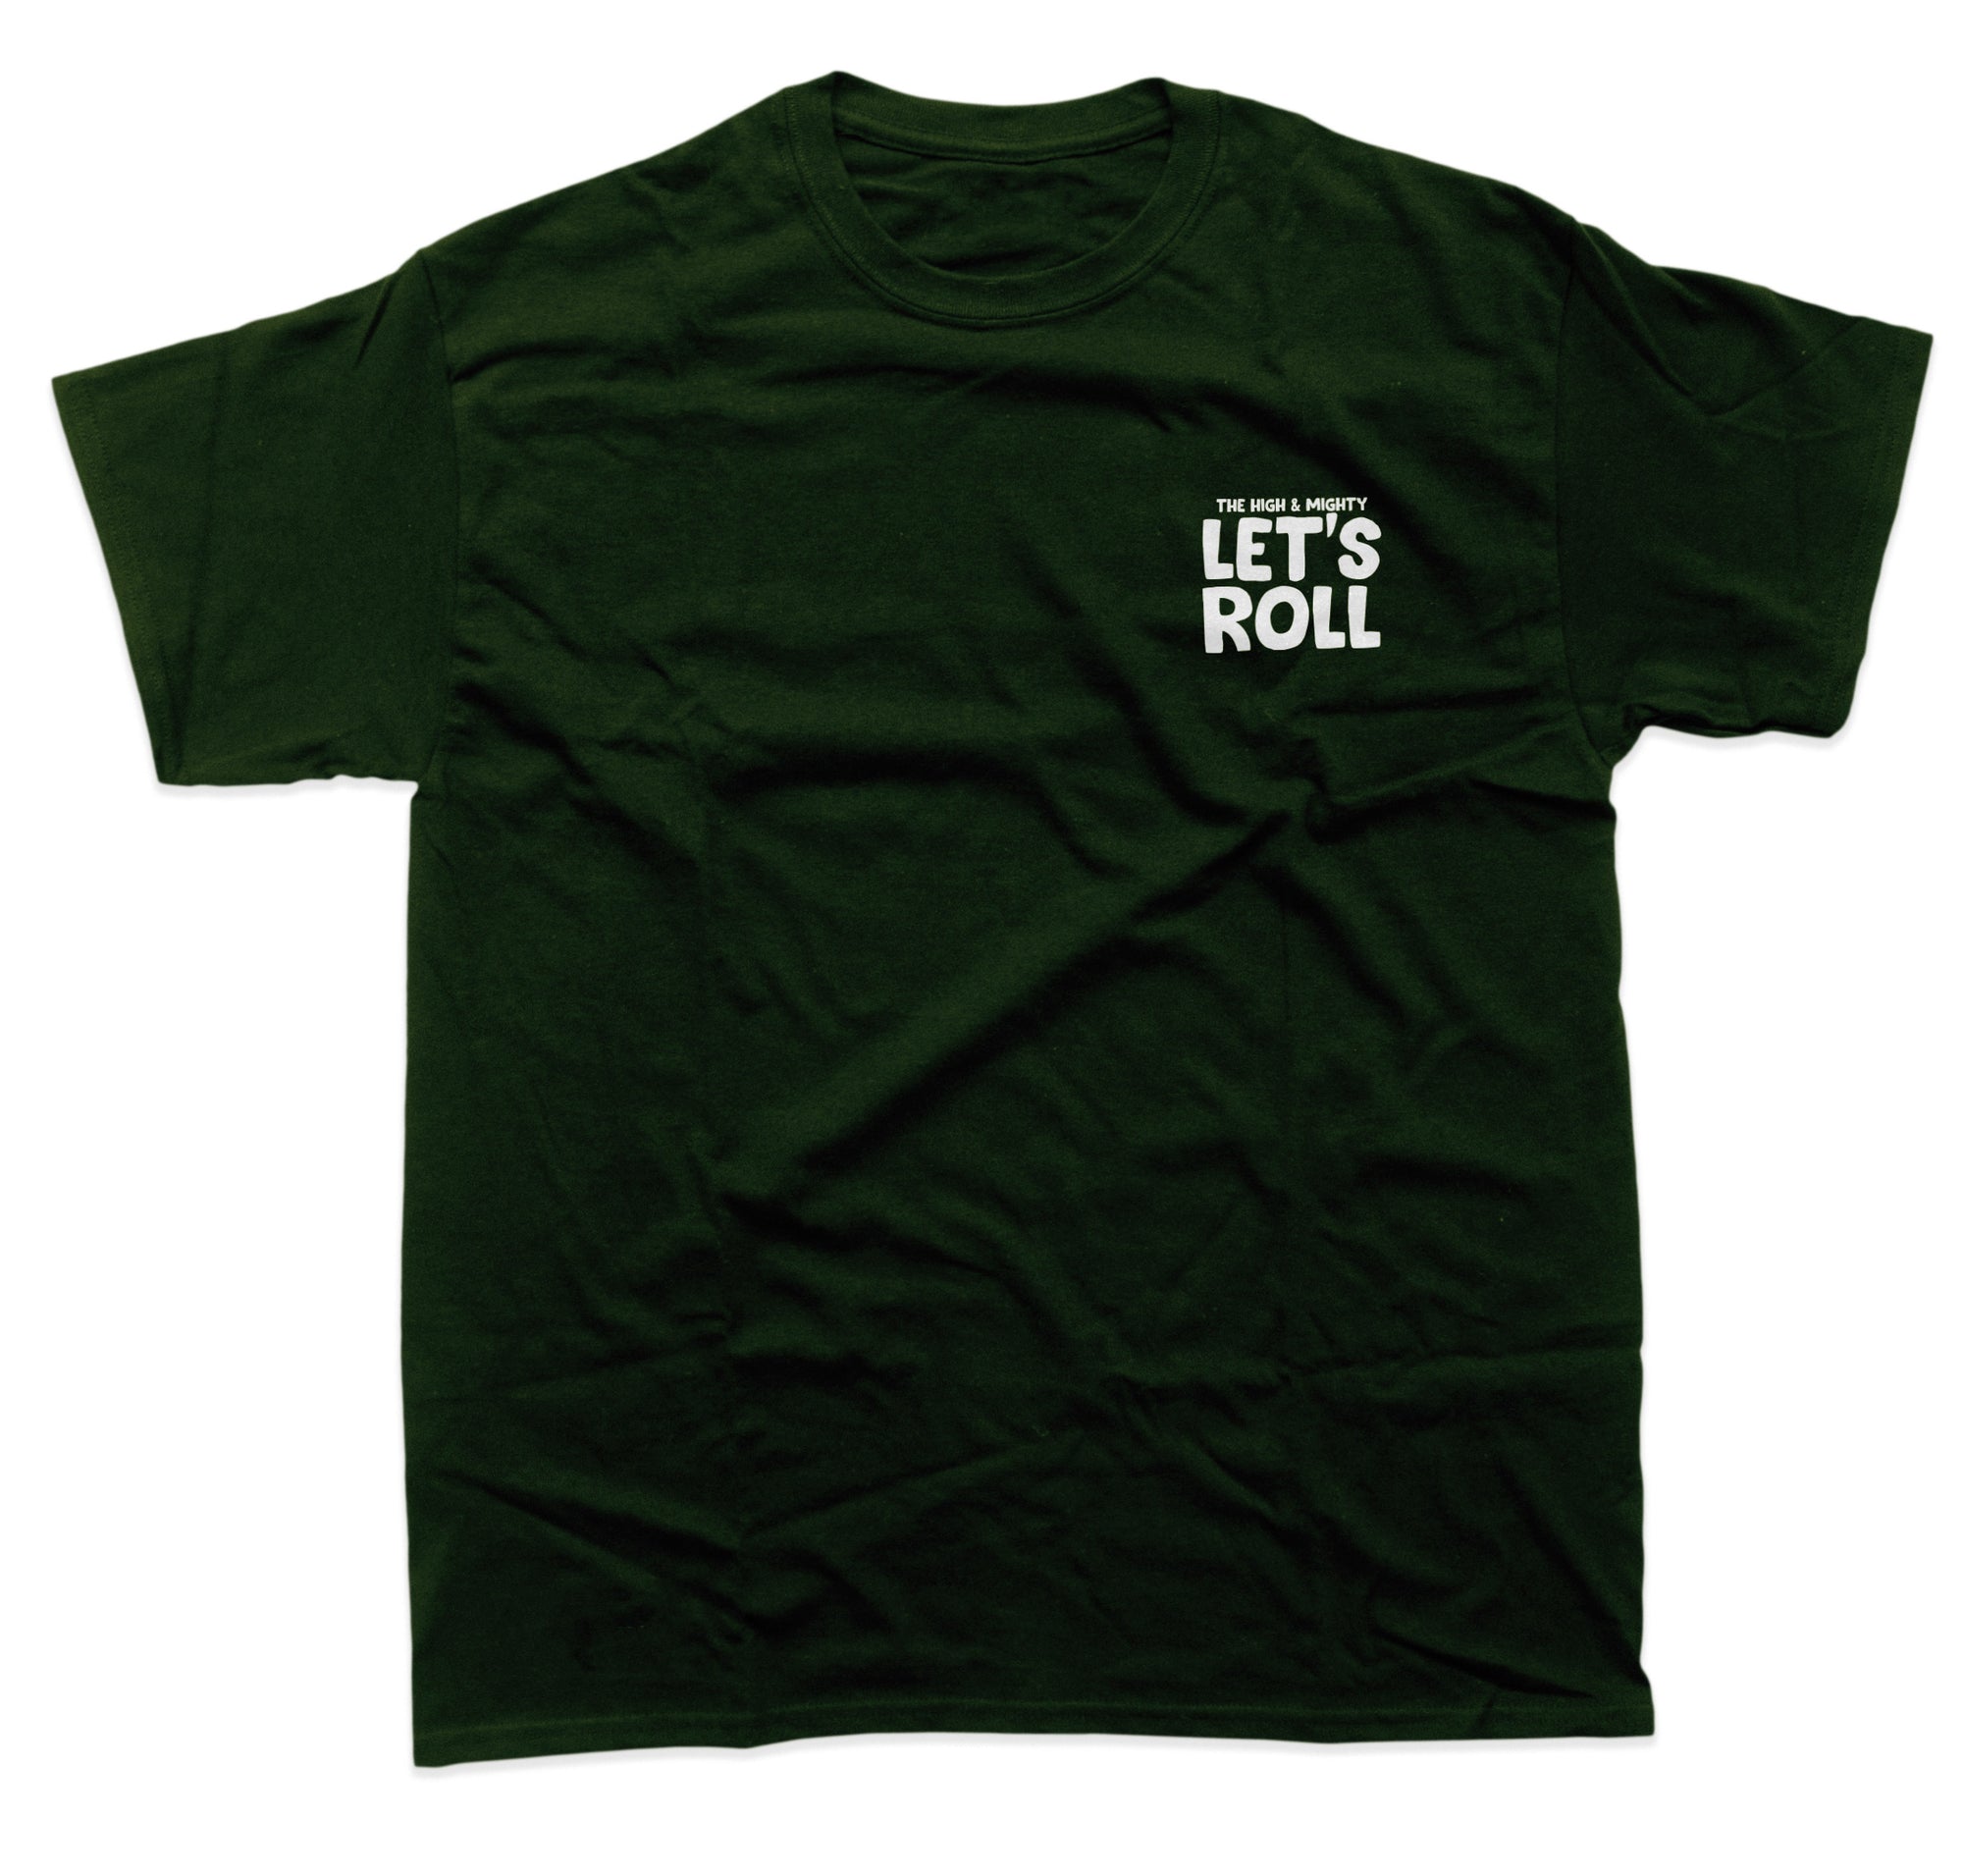 Let's Roll - The High & Mighty